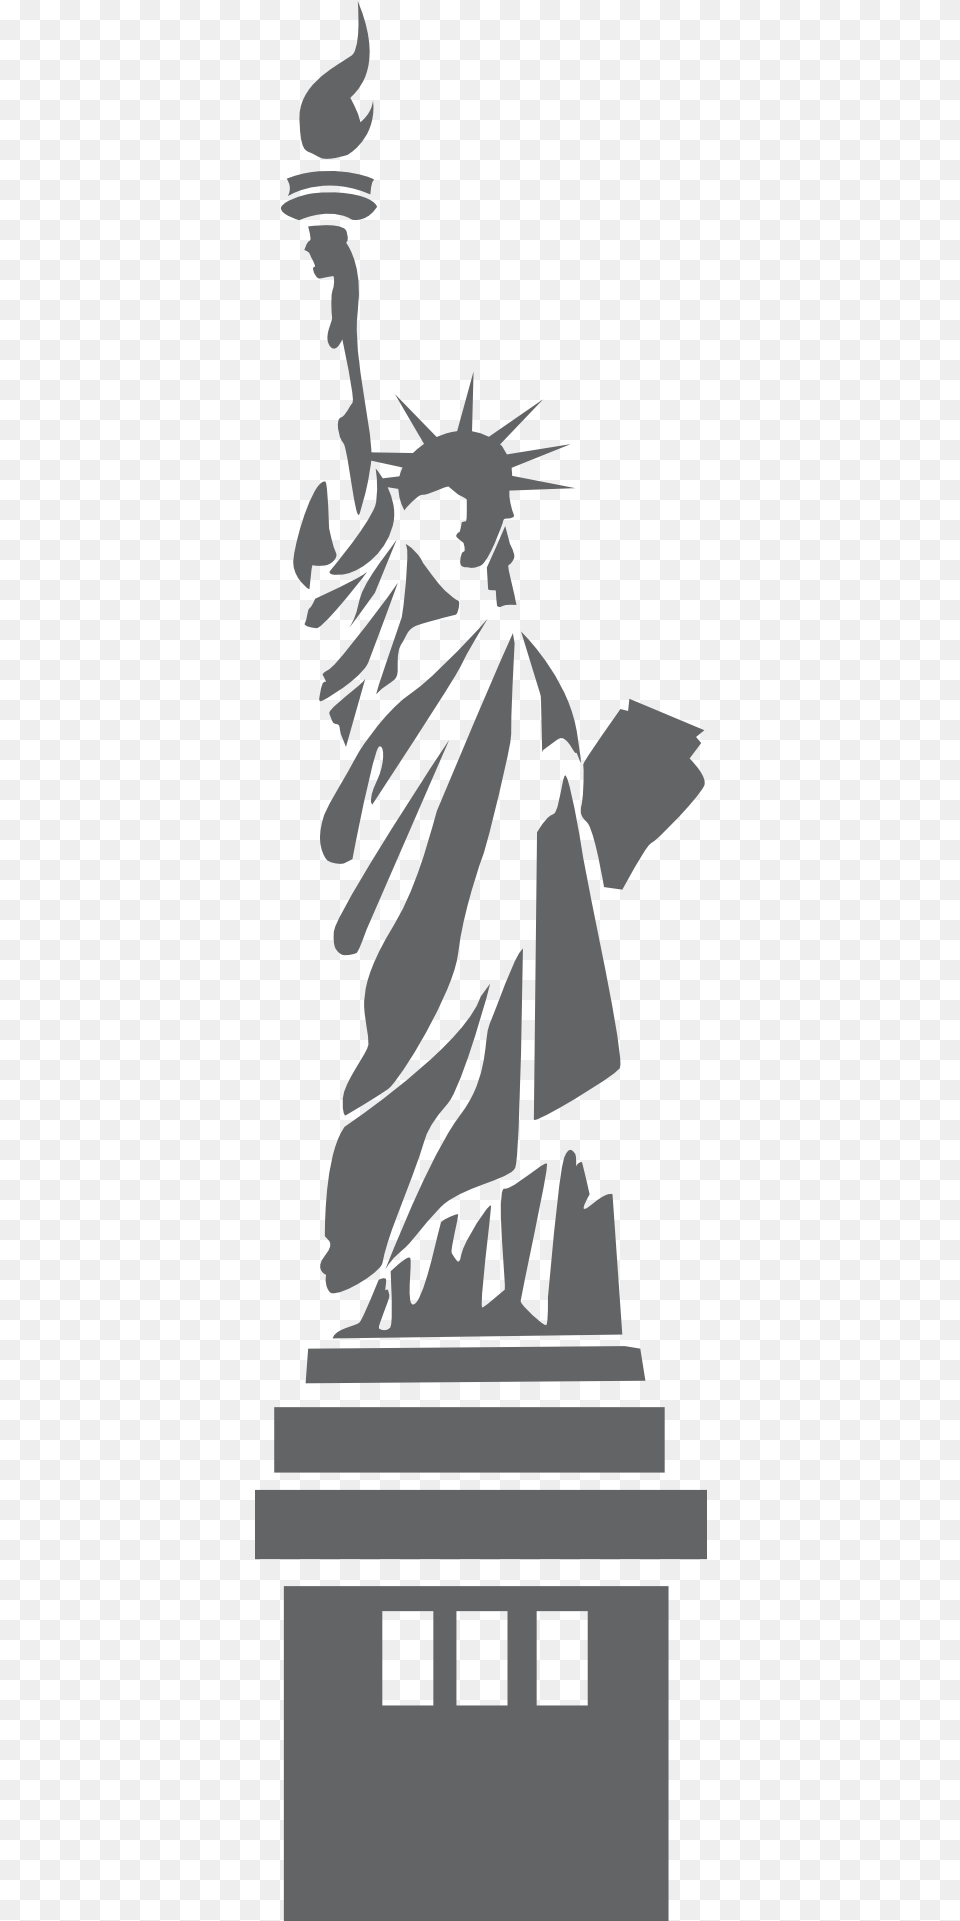 The Statue Of Liberty Outline Free Vector Blue Statue Of Liberty, Stencil, Book, Comics, Publication Png